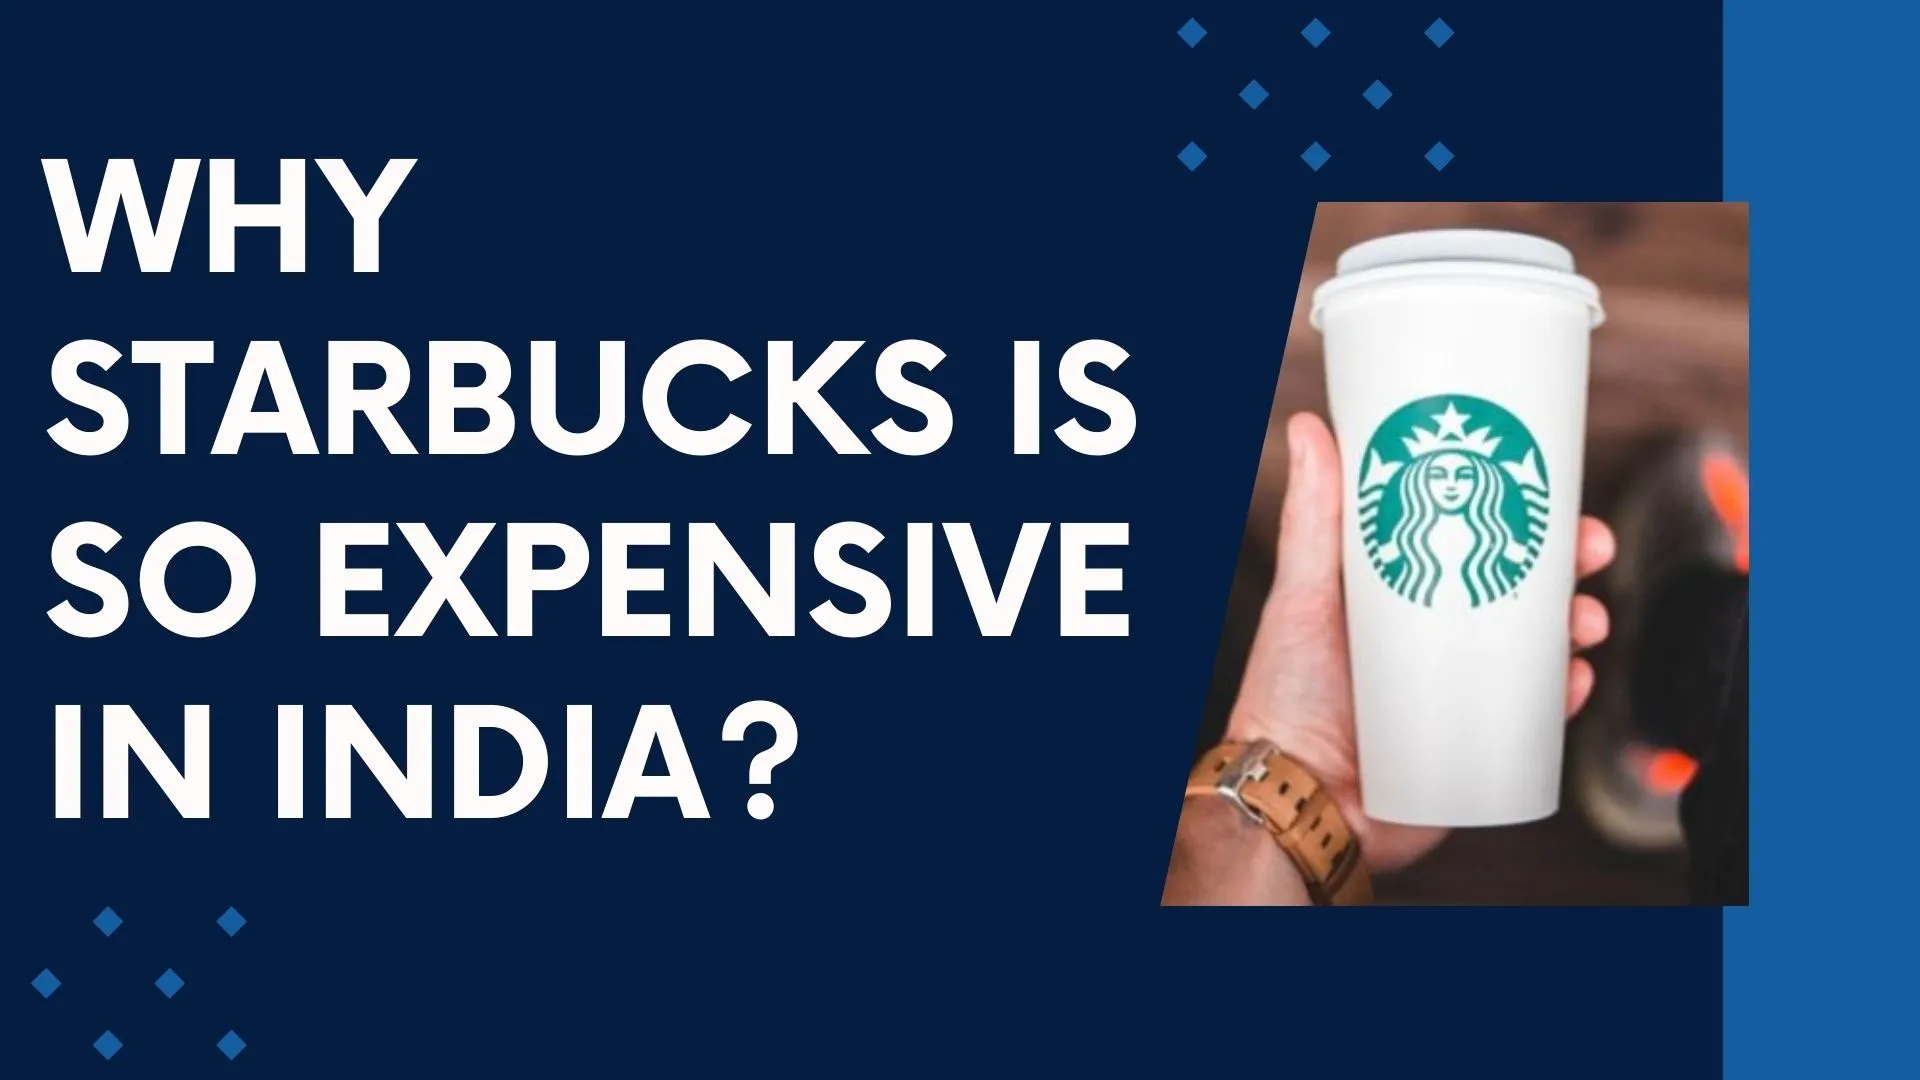 Why Starbucks is so expensive, Why Starbucks is so expensive in India?